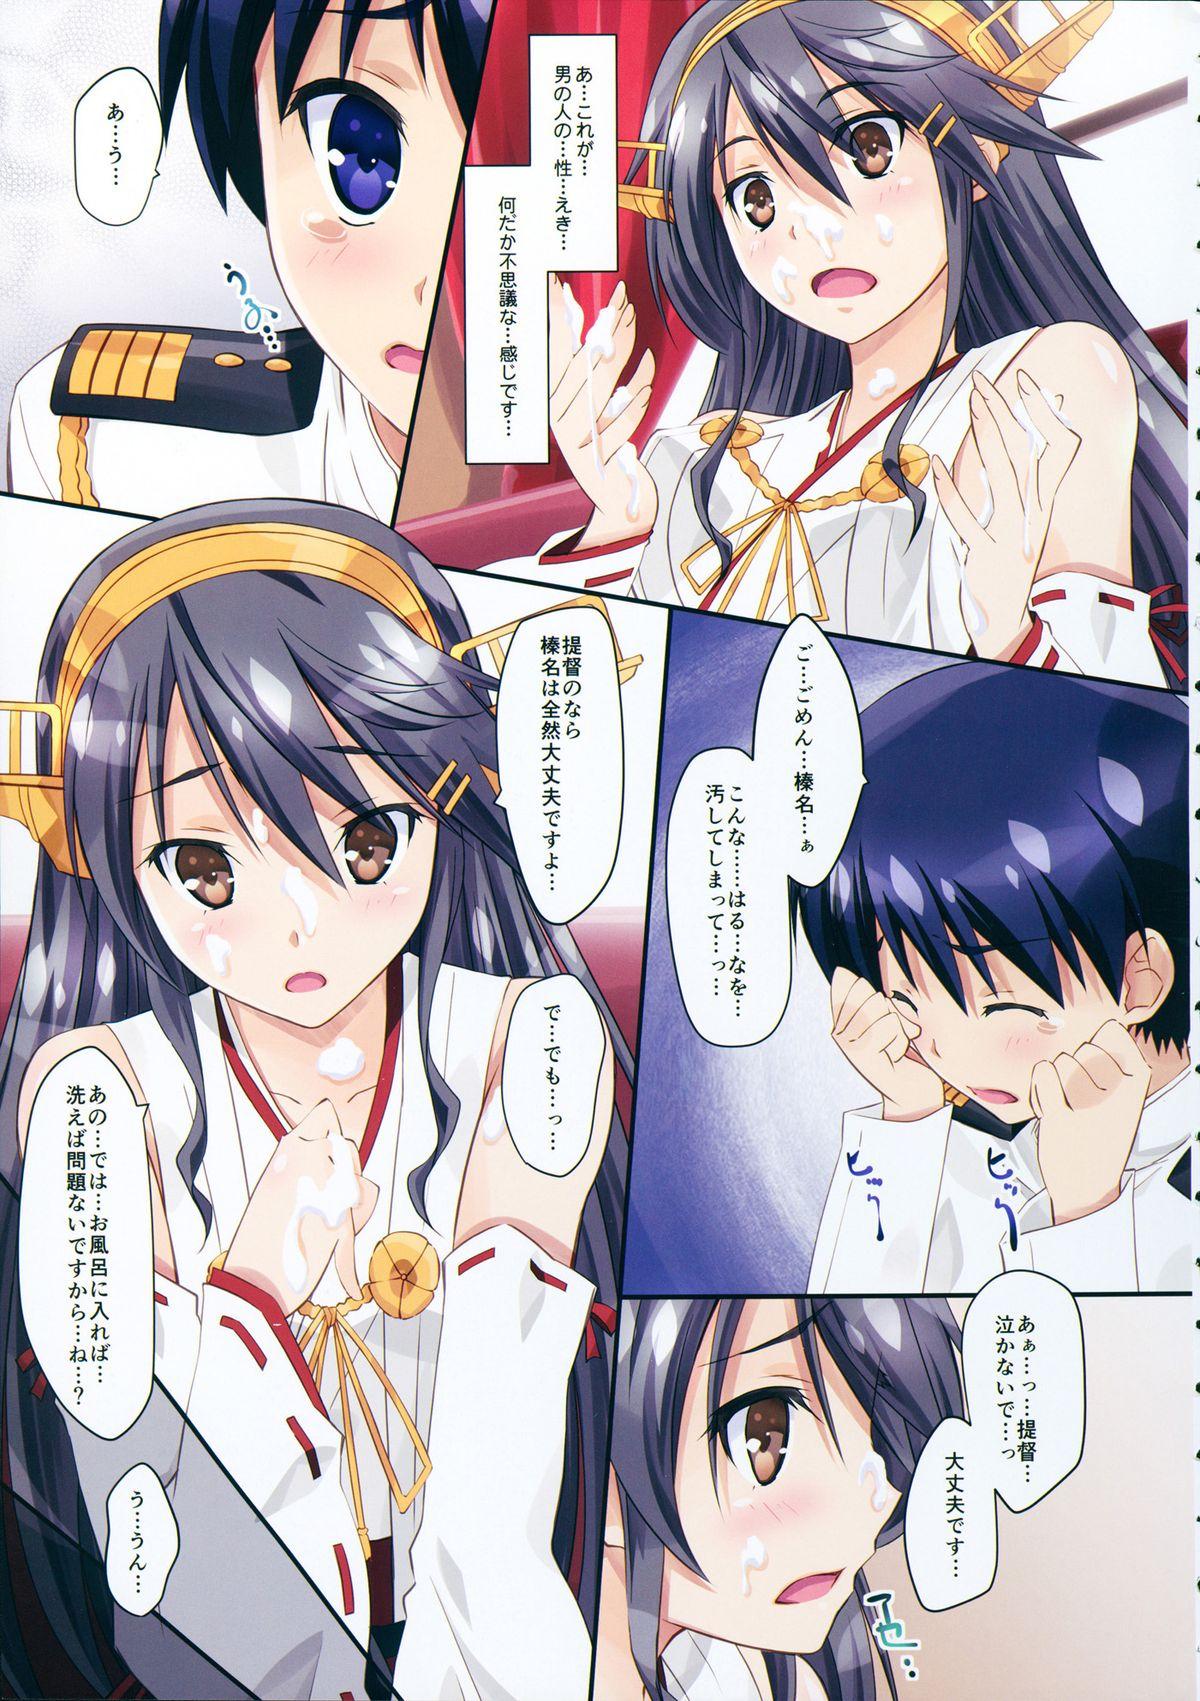 Gostosas Haruna to Issho - Kantai collection Uncensored - Page 11